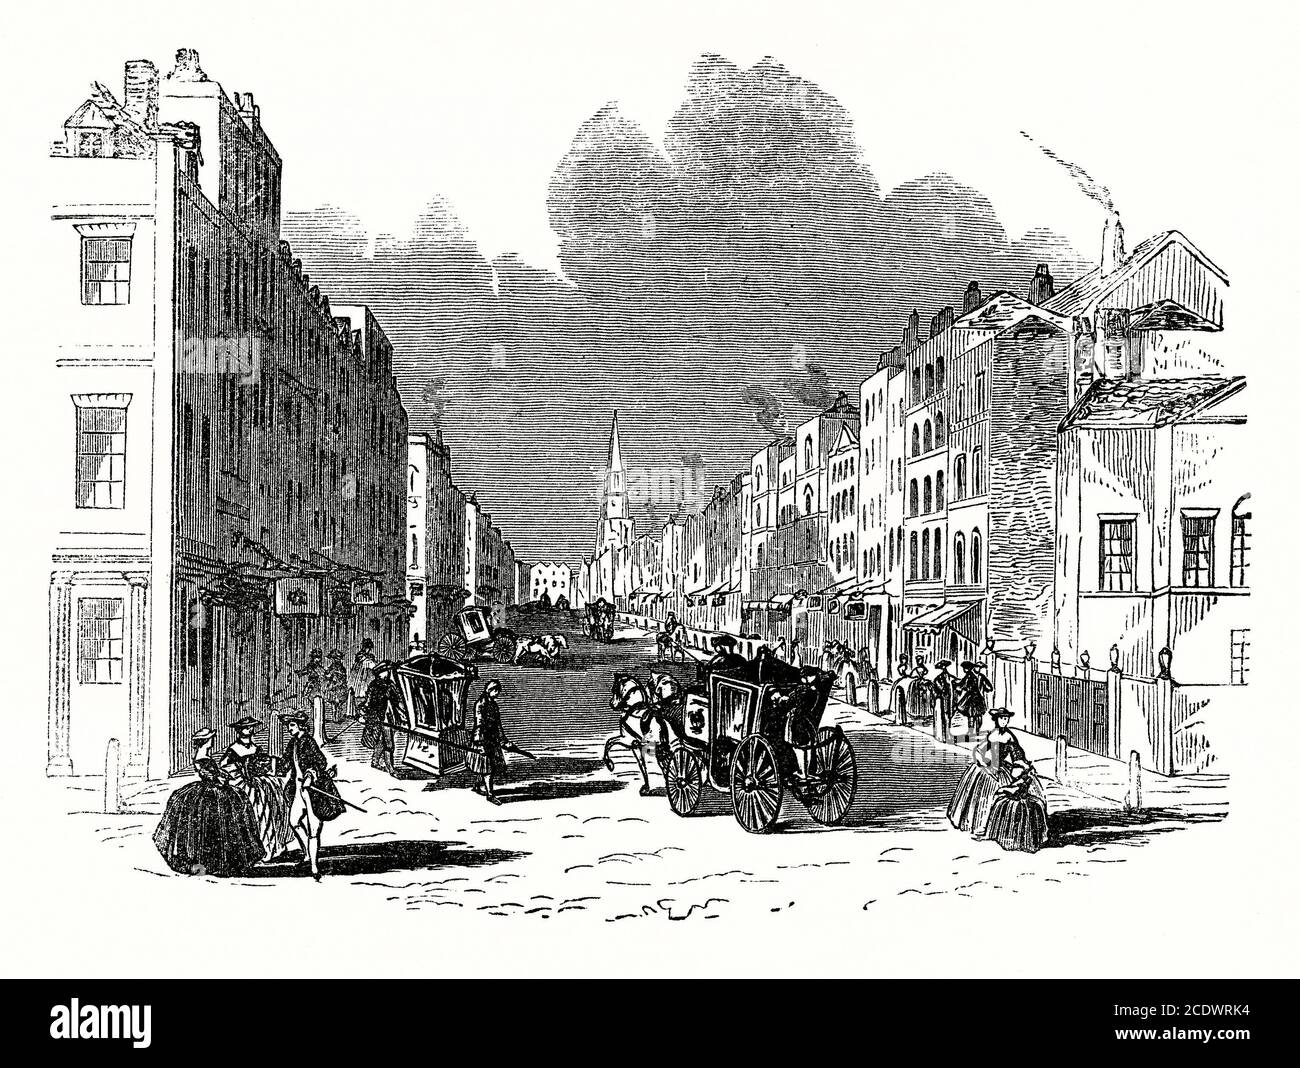 An old engraving of Pall Mall, London, England, UK in the mid 1700s. Pall Mall is a street in the St James's area of the City of Westminster. This view shows shops and shoppers with horses and carriages. The street's name is derived from 'pall-mall', a ball game played there during the 1600s. A new road was built on the site of the old pall-mall court, and opened in 1661. It was named Catherine Street, after Catherine of Braganza, wife of Charles II, but was better known as Pall Mall Street or the Old Pall Mall. It became well-known for its fashionable shops and grand houses. Stock Photo